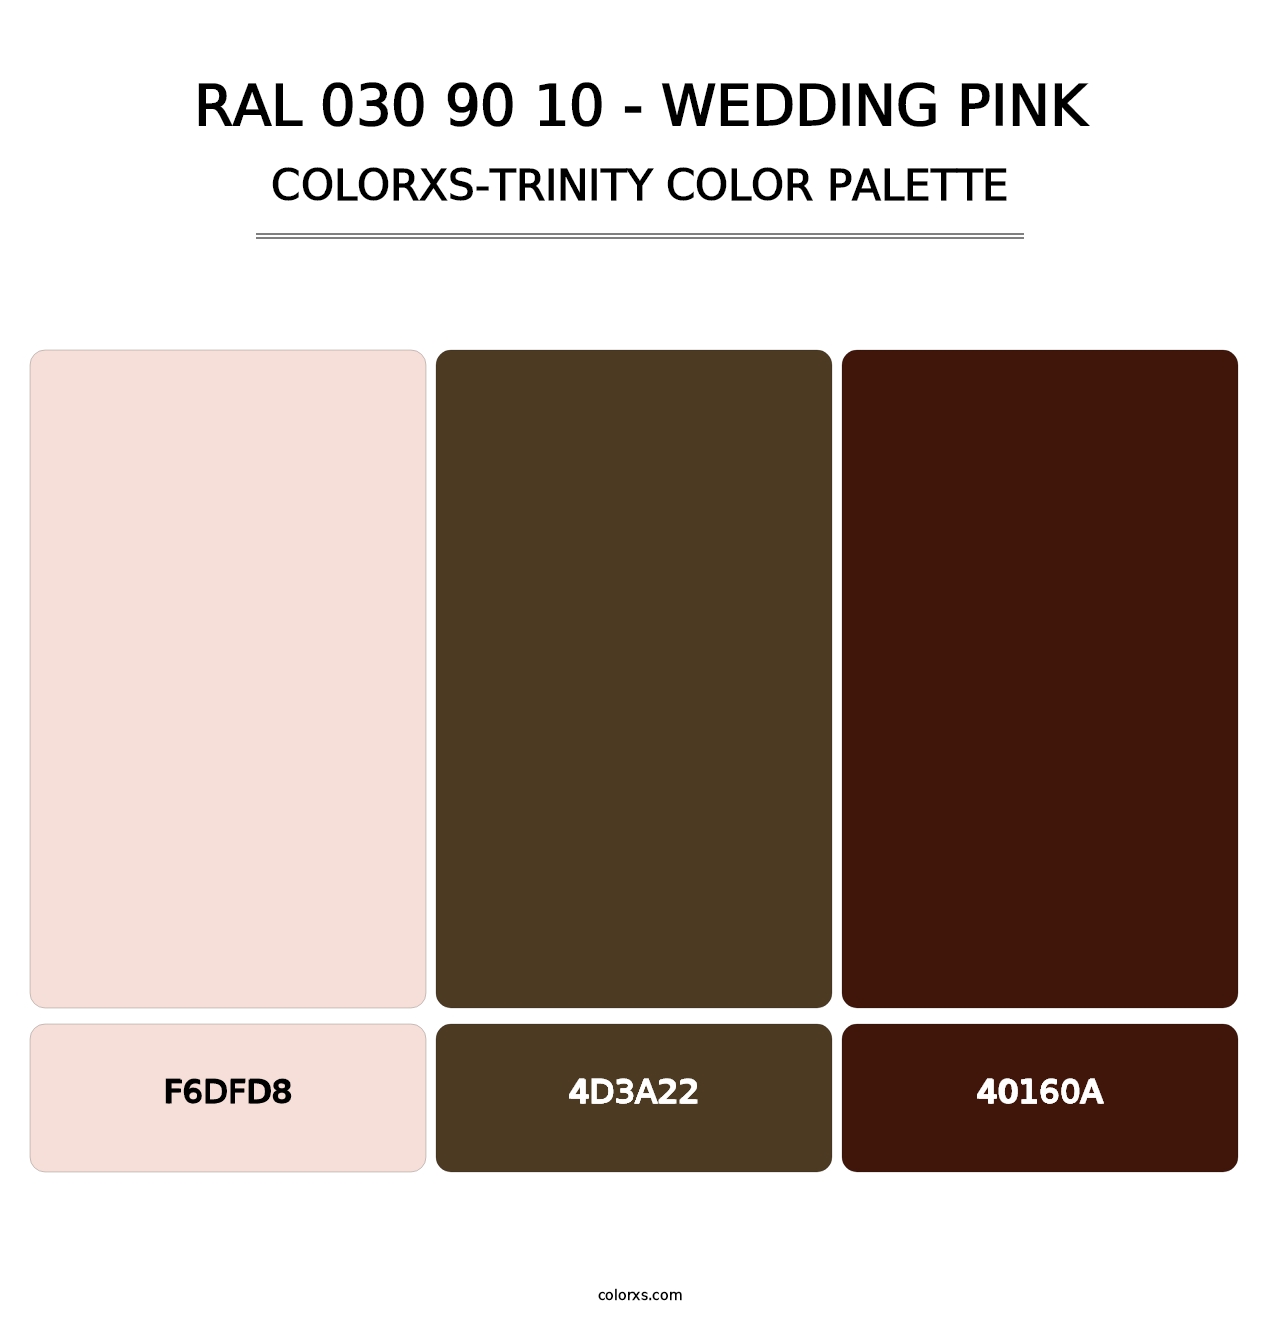 RAL 030 90 10 - Wedding Pink - Colorxs Trinity Palette